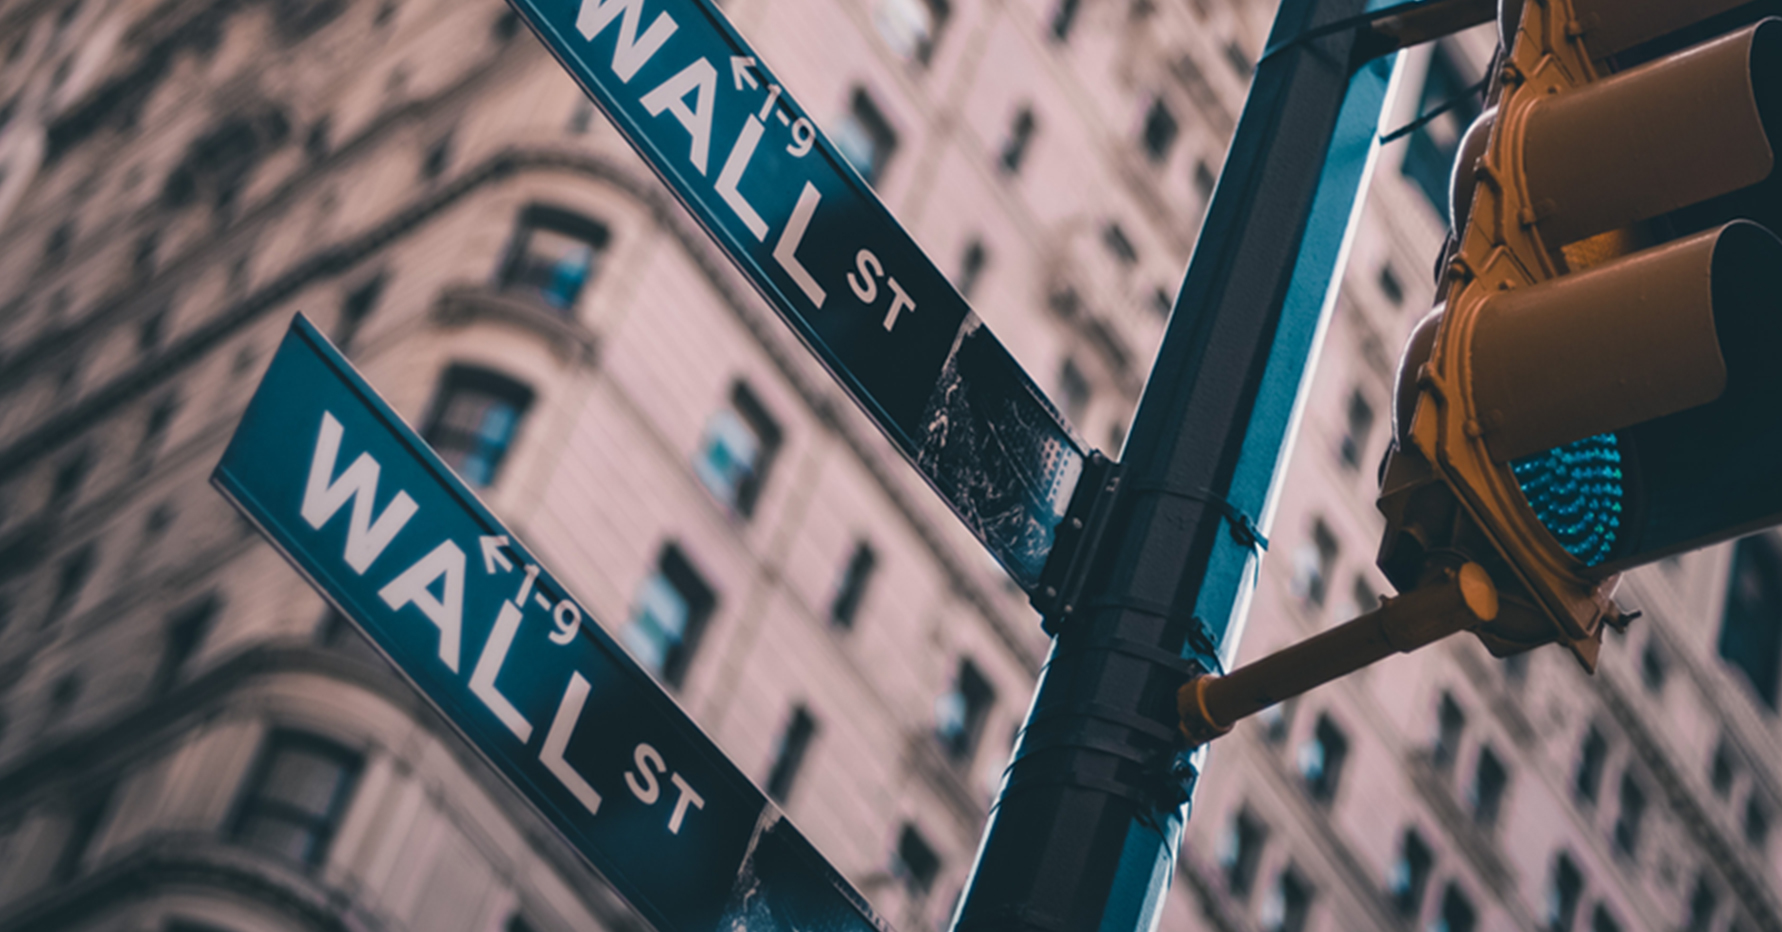 Photograph of Wall Street sign in New York City